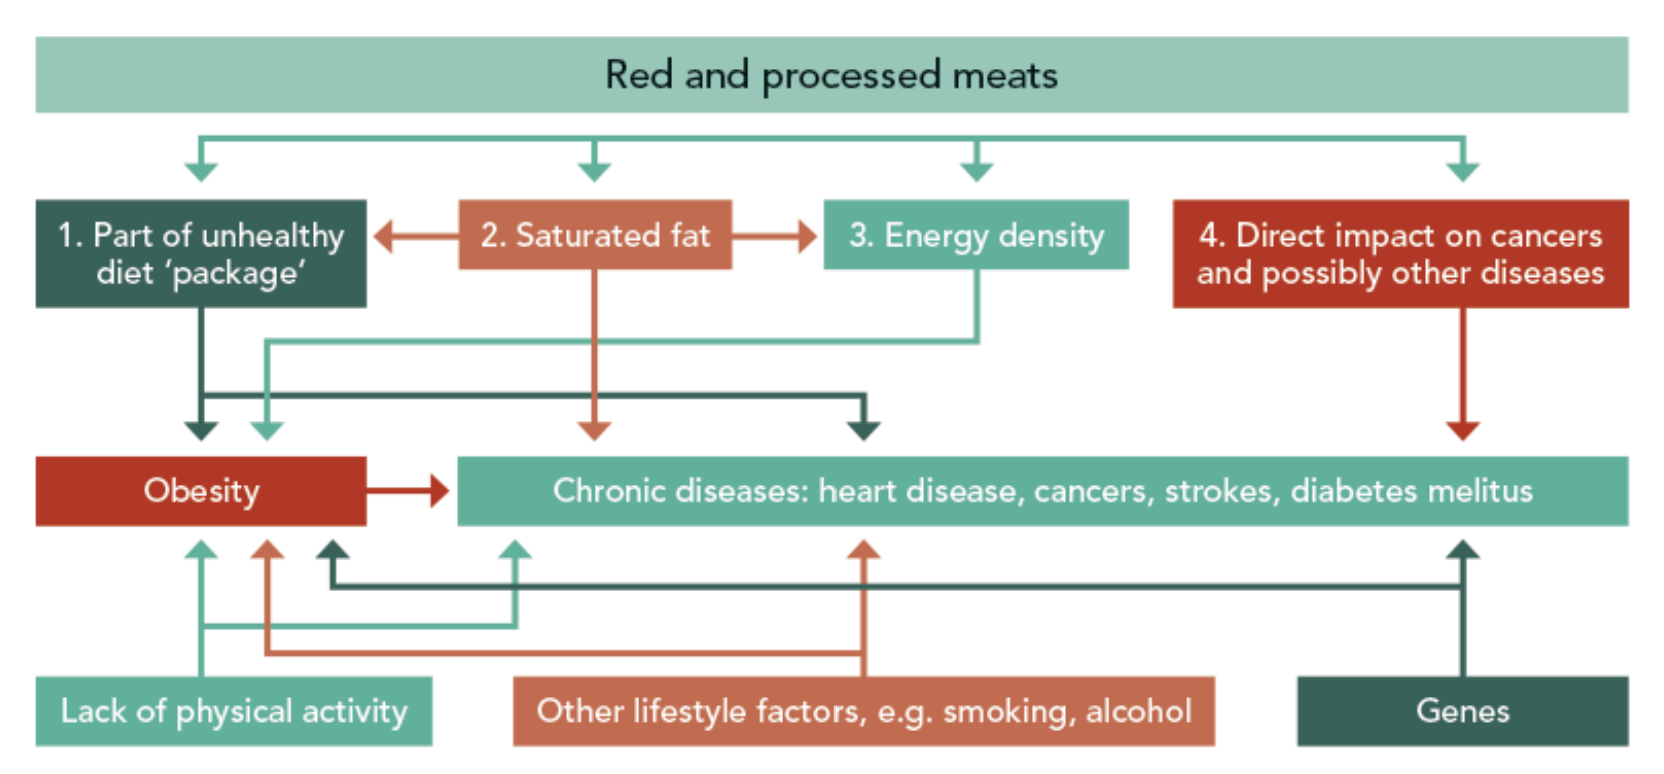 Figure 3: Biological pathways linking the consumption of red and processed meats to health impacts.